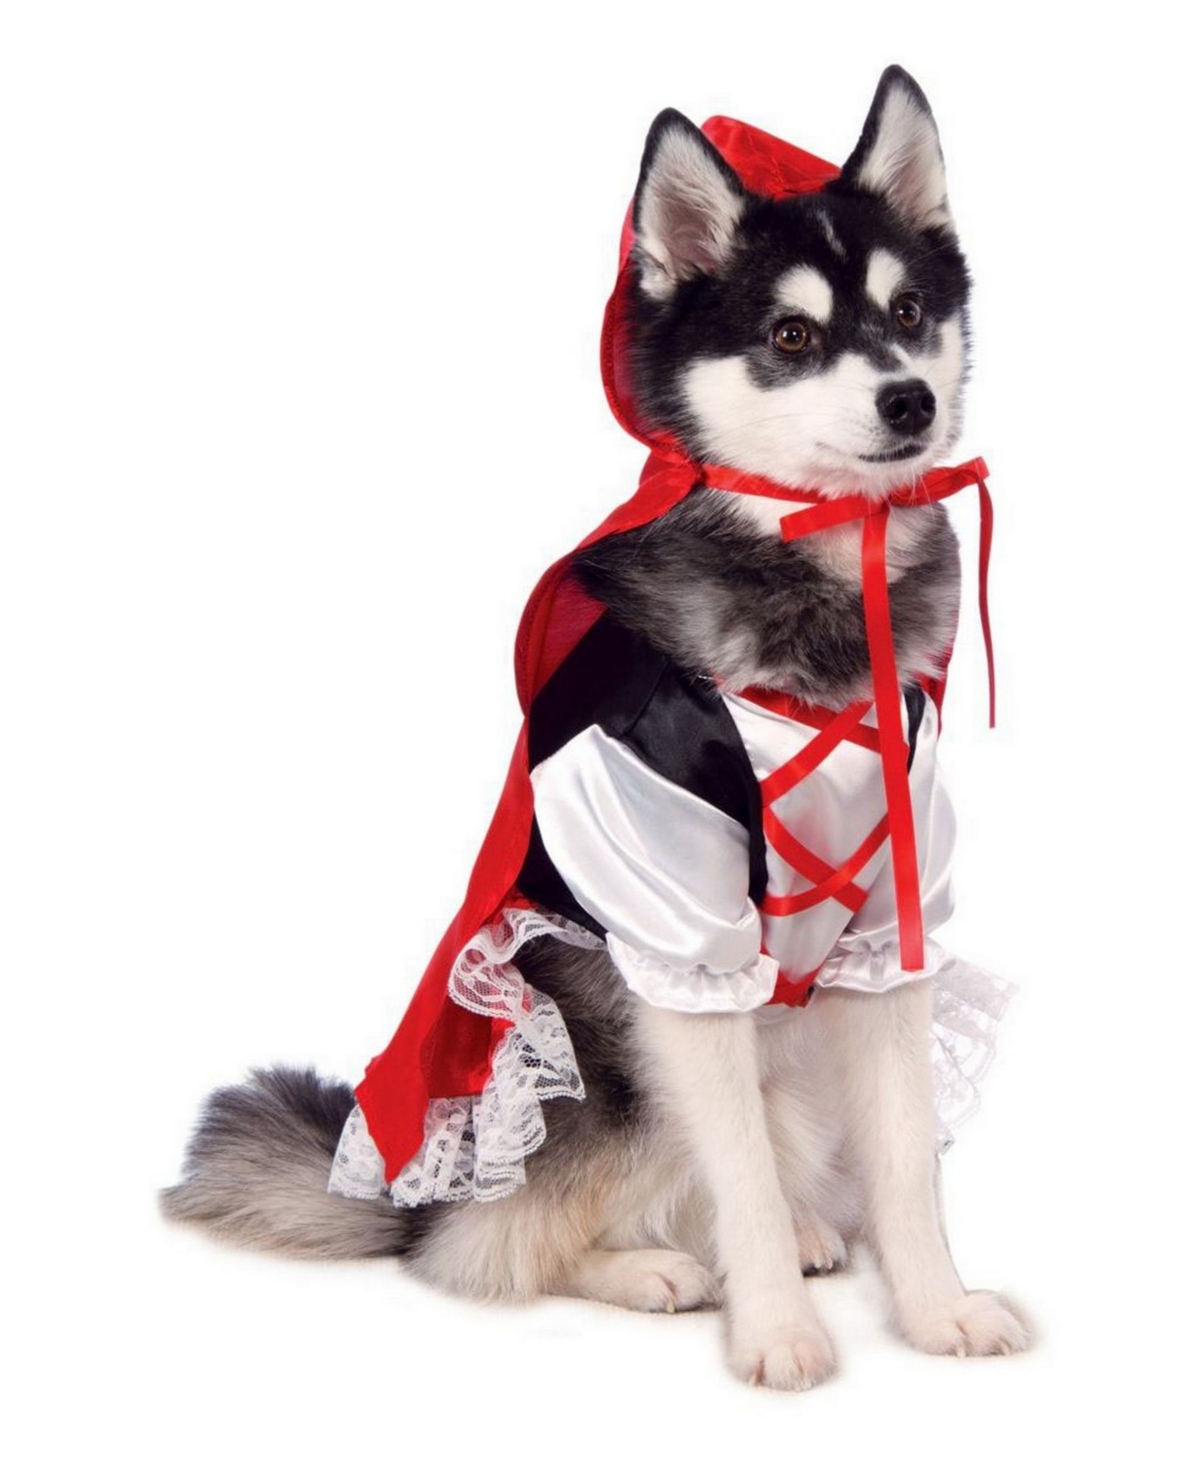 Red Riding Hood Pet Costume - Red